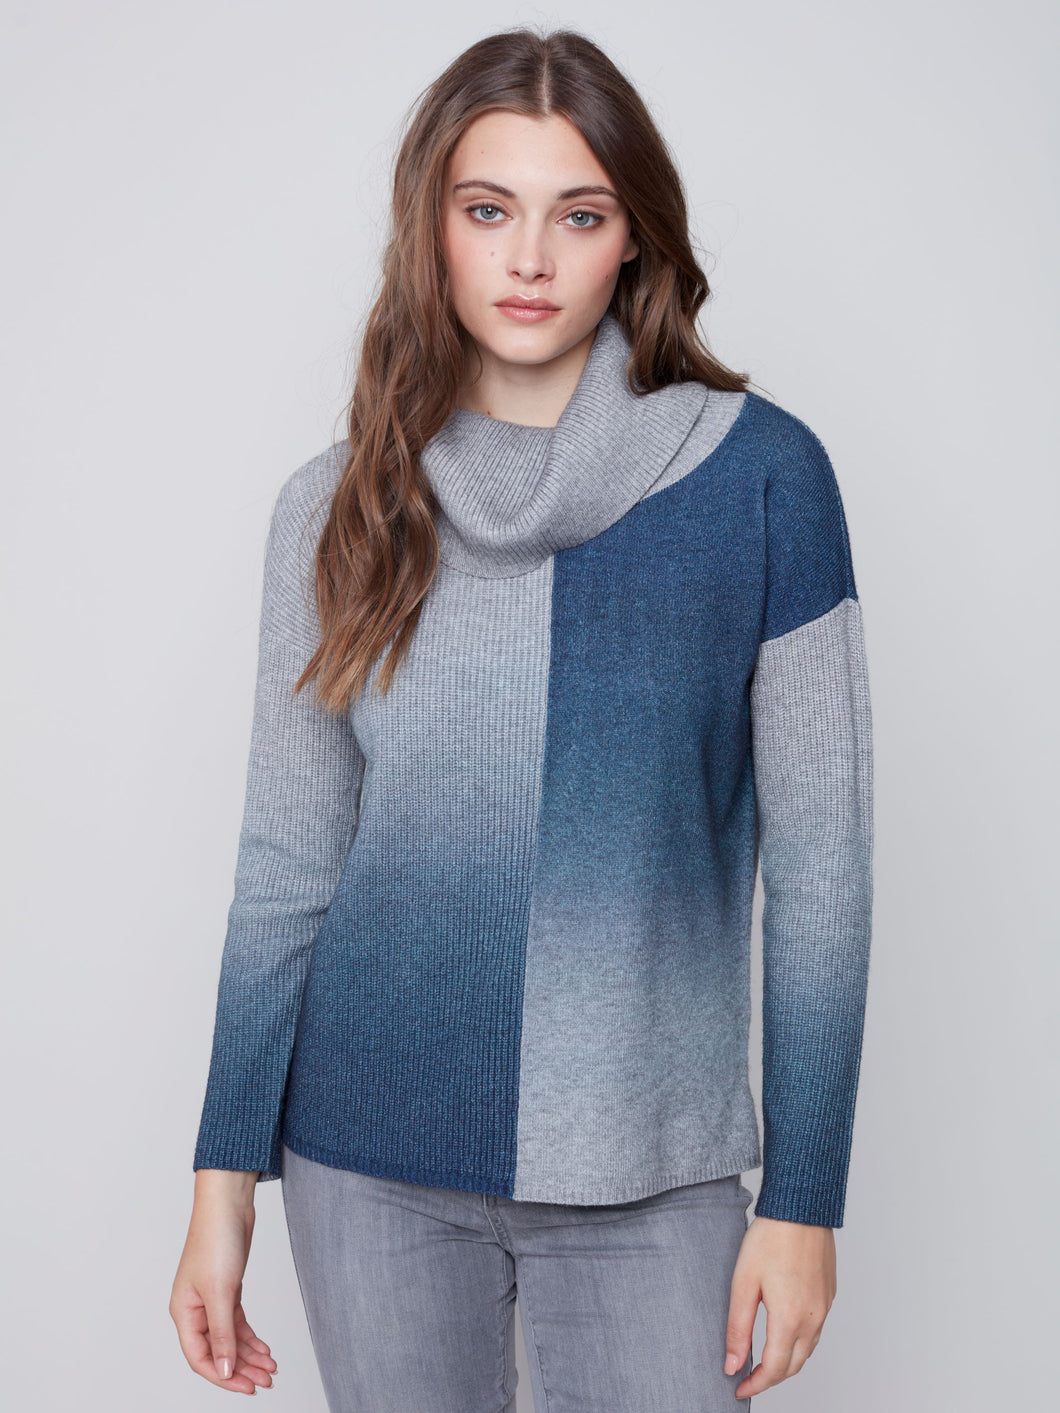 Charlie B Denim Cowl Neck Up-And-Down Ombré Printed Sweater